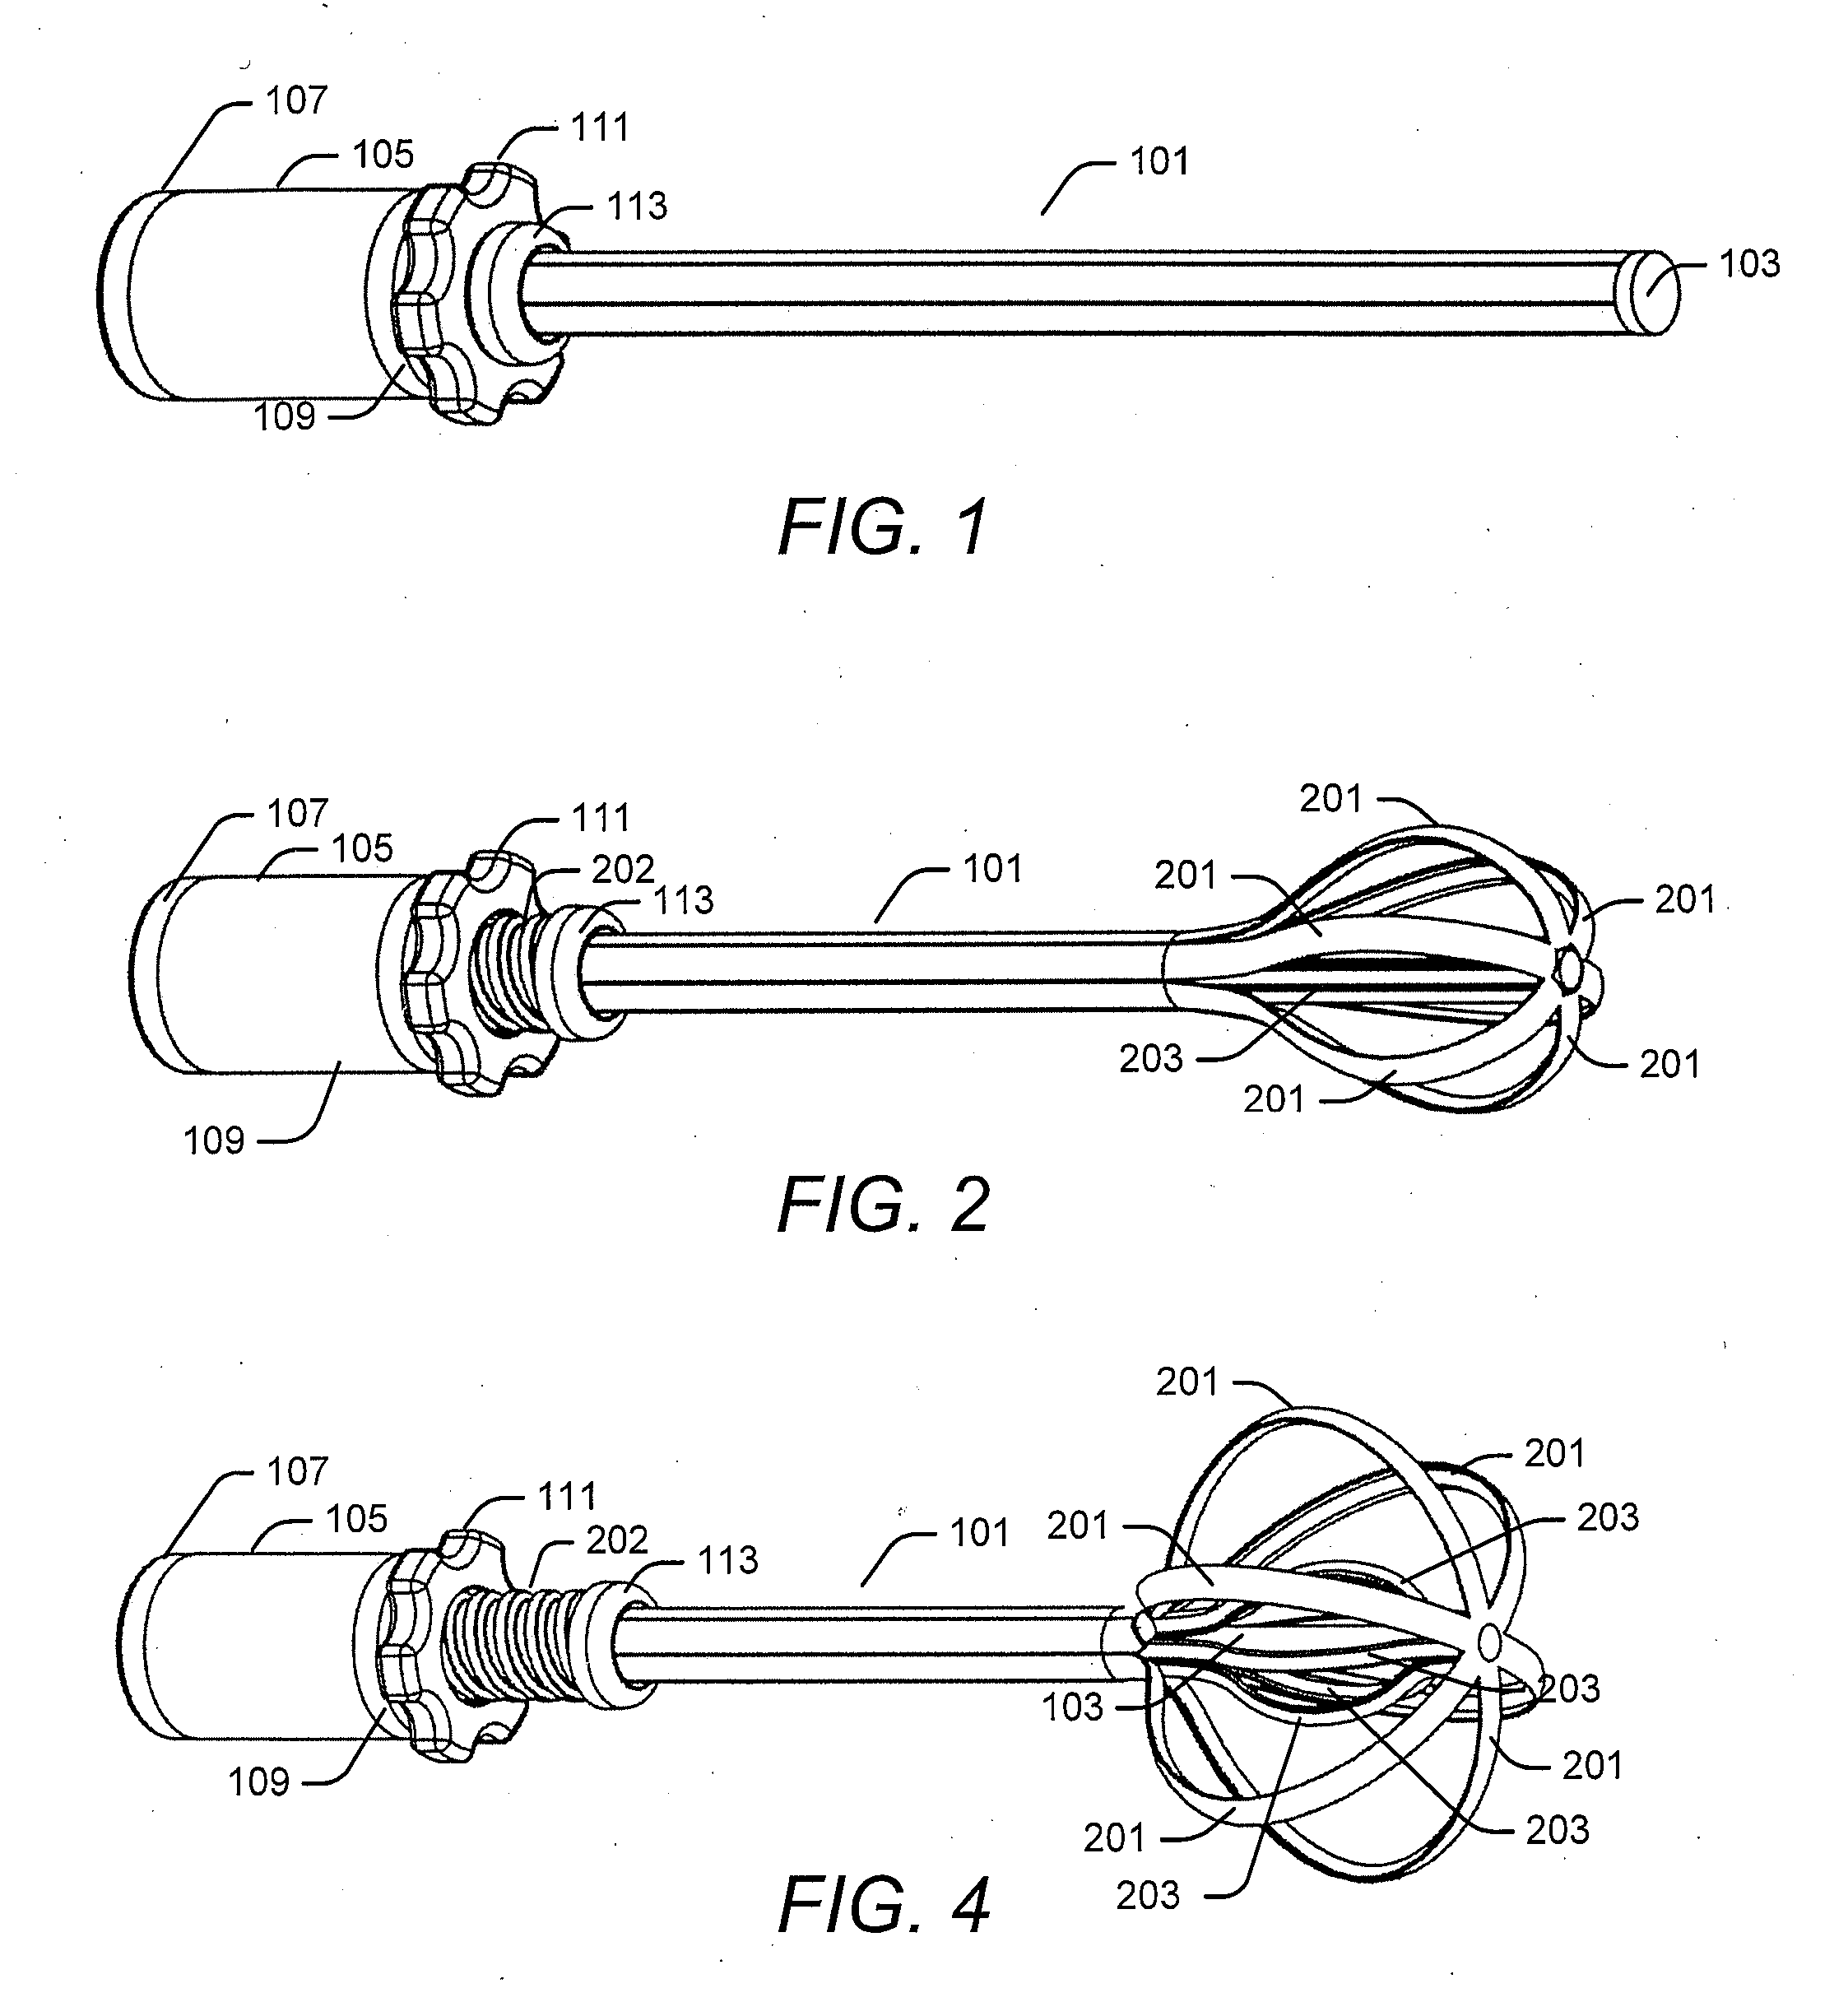 Expandable brachytherapy device with constant radiation source spacing